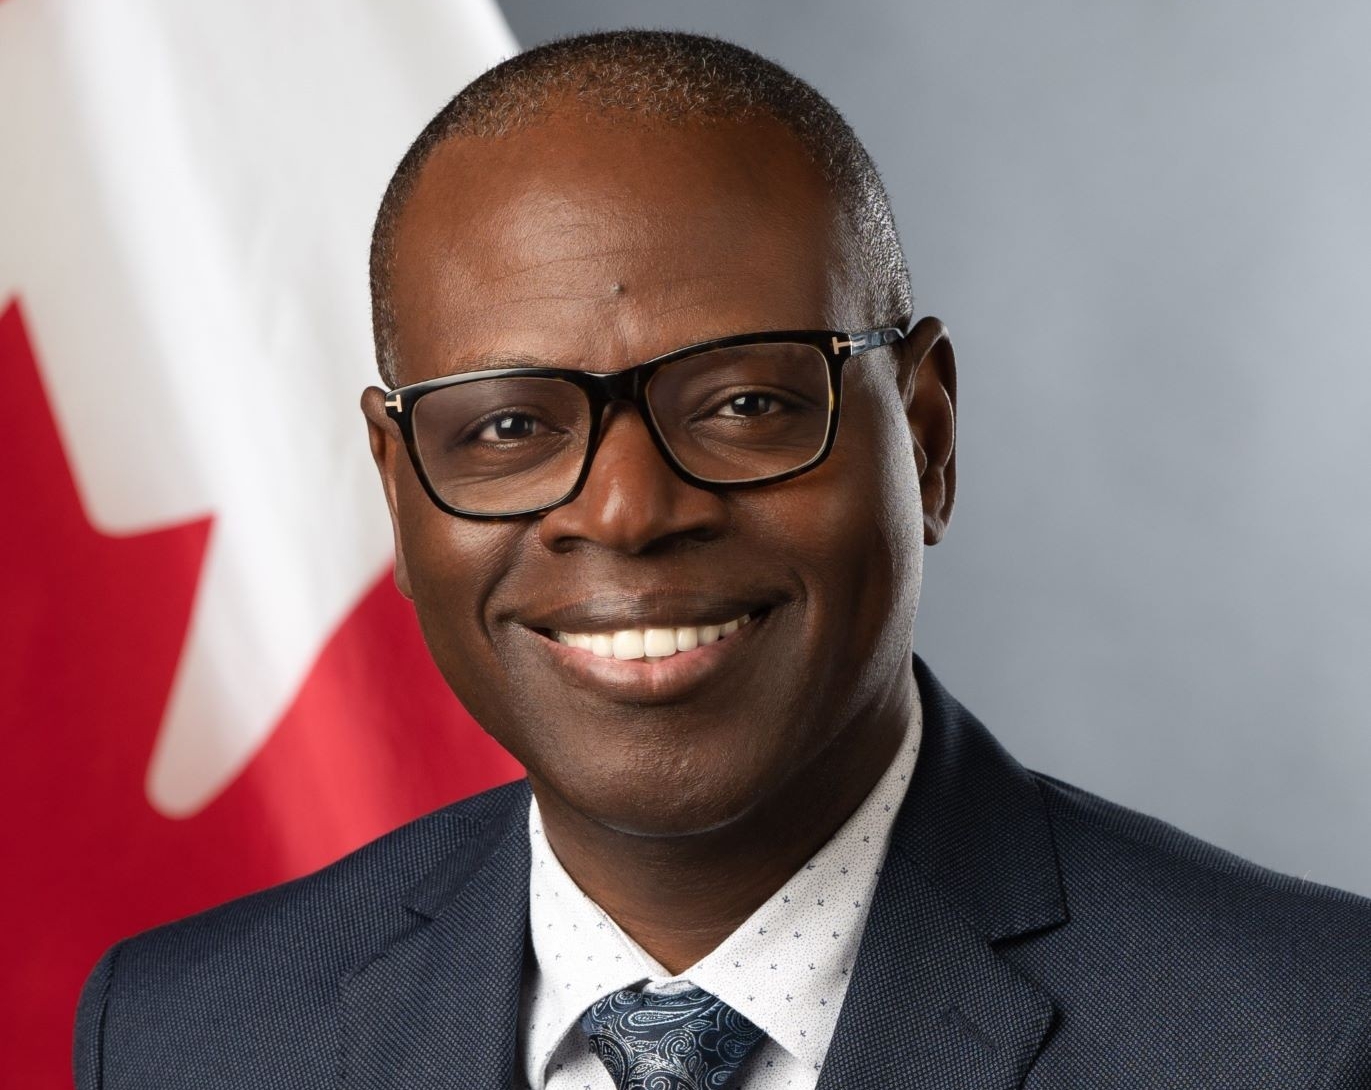 A smiling man in a suit with a paisley tie, glasses, against a Canadian flag backdrop.